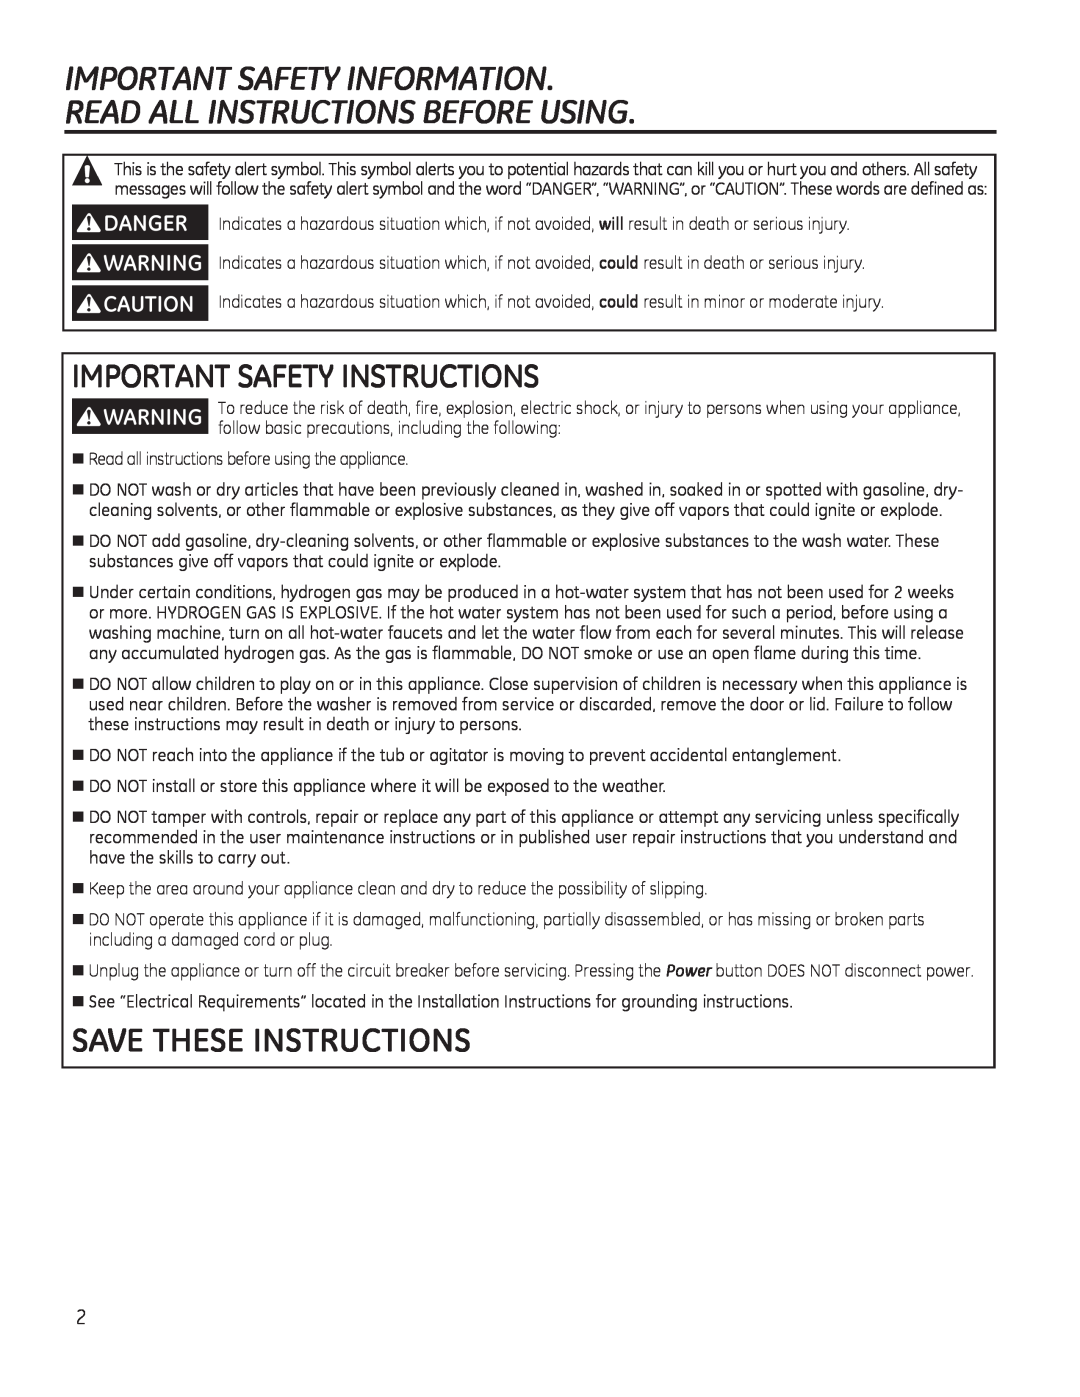 GE g006 Important Safety Information, Read All Instructions Before Using, Important Safety Instructions, Danger 